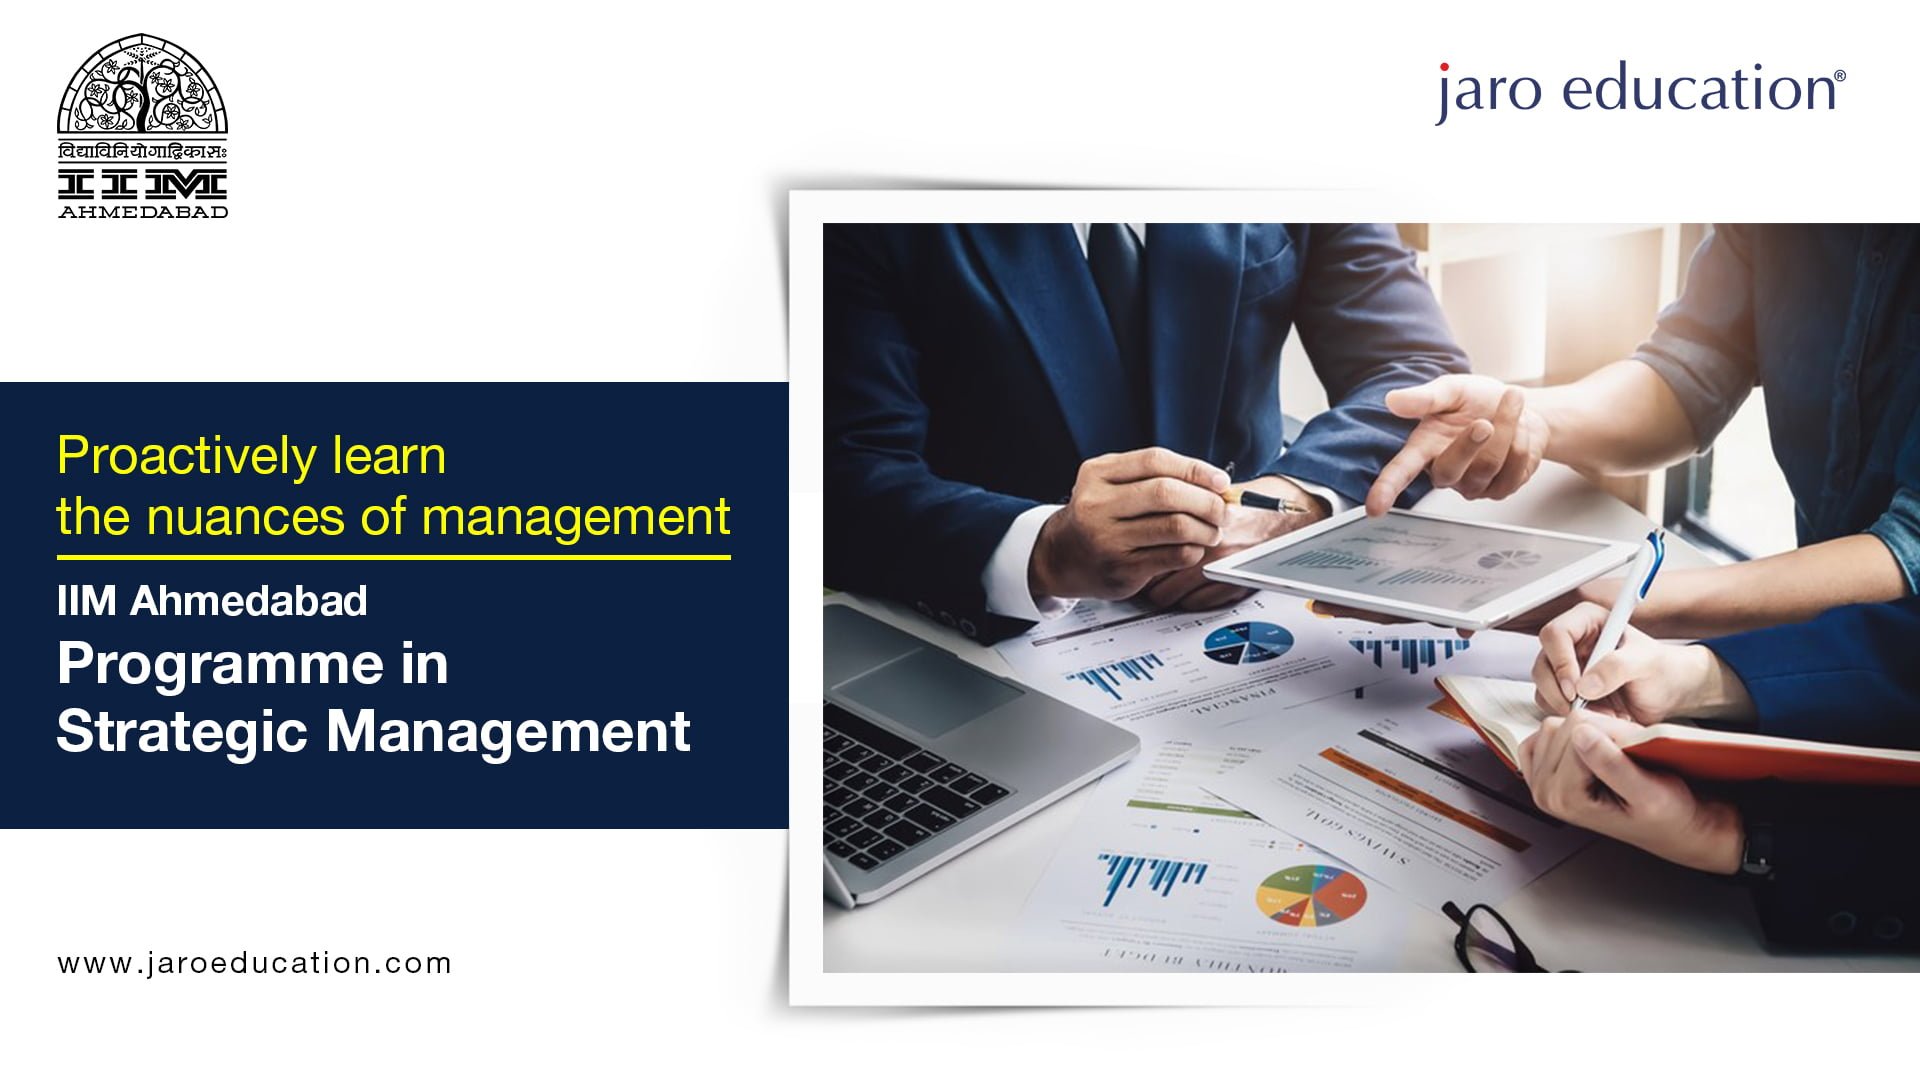 enefits-of-Strategic-Management-and-Leadership-Course jaro